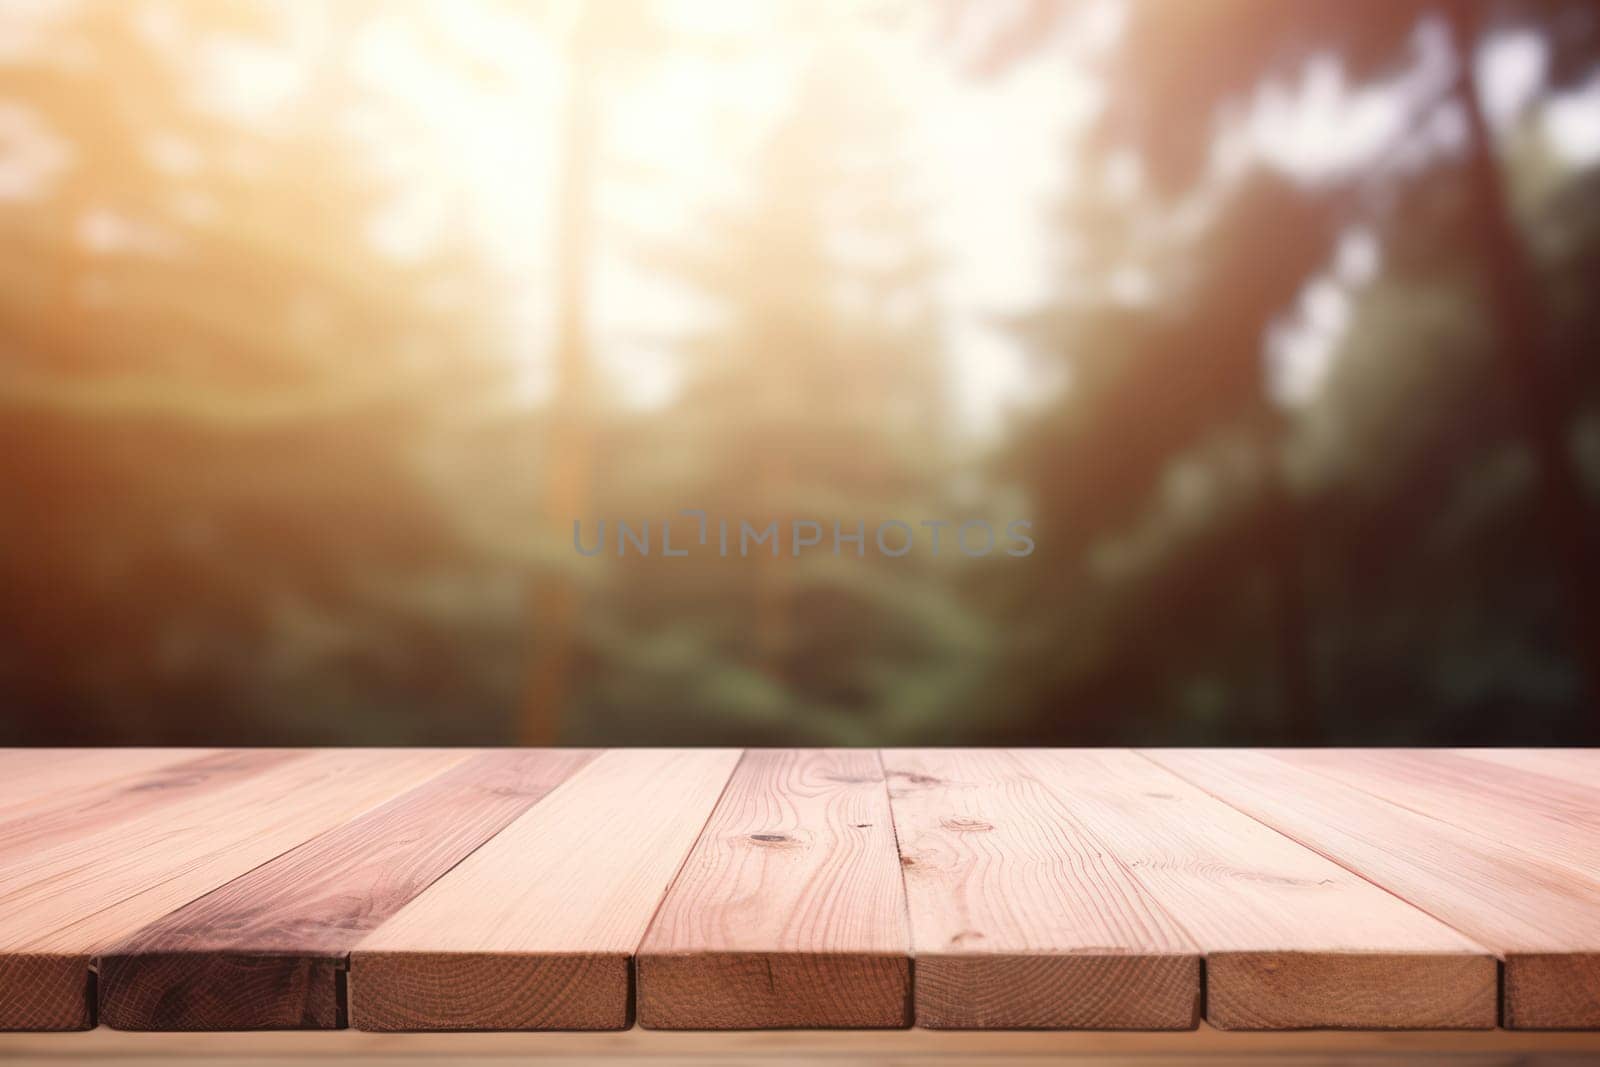 Nature's Embrace: A Rustic Wooden Table in a Sunlit Garden, Showcasing the Beauty of an Empty Top, Surrounded by Greenery and Abstract Bokeh".